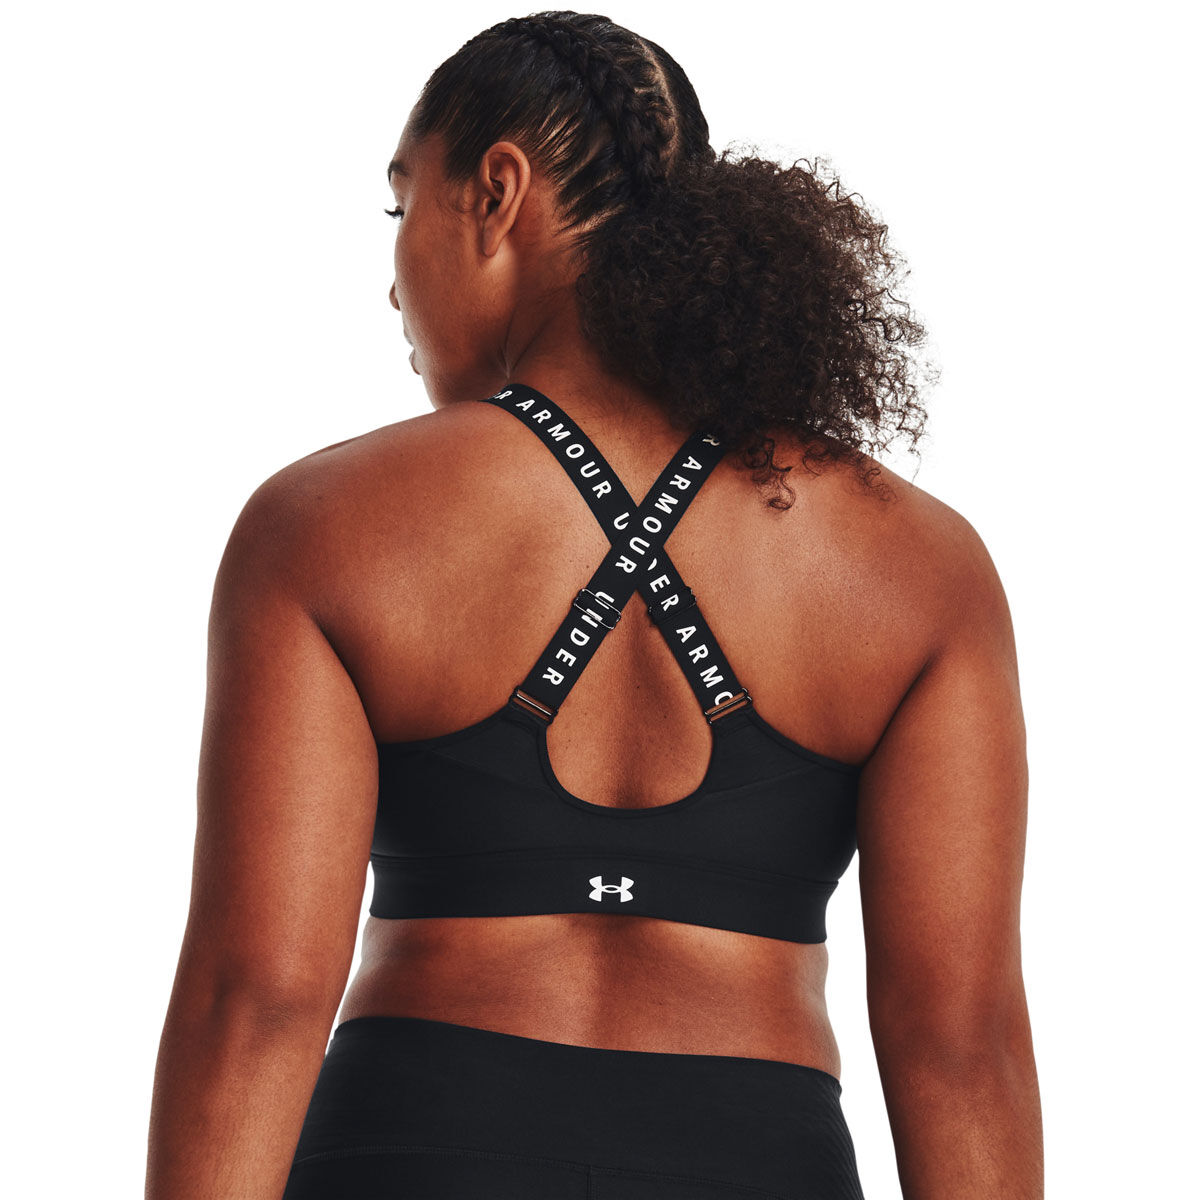 rebel sport - The Under Armour Infinity sports bra is a